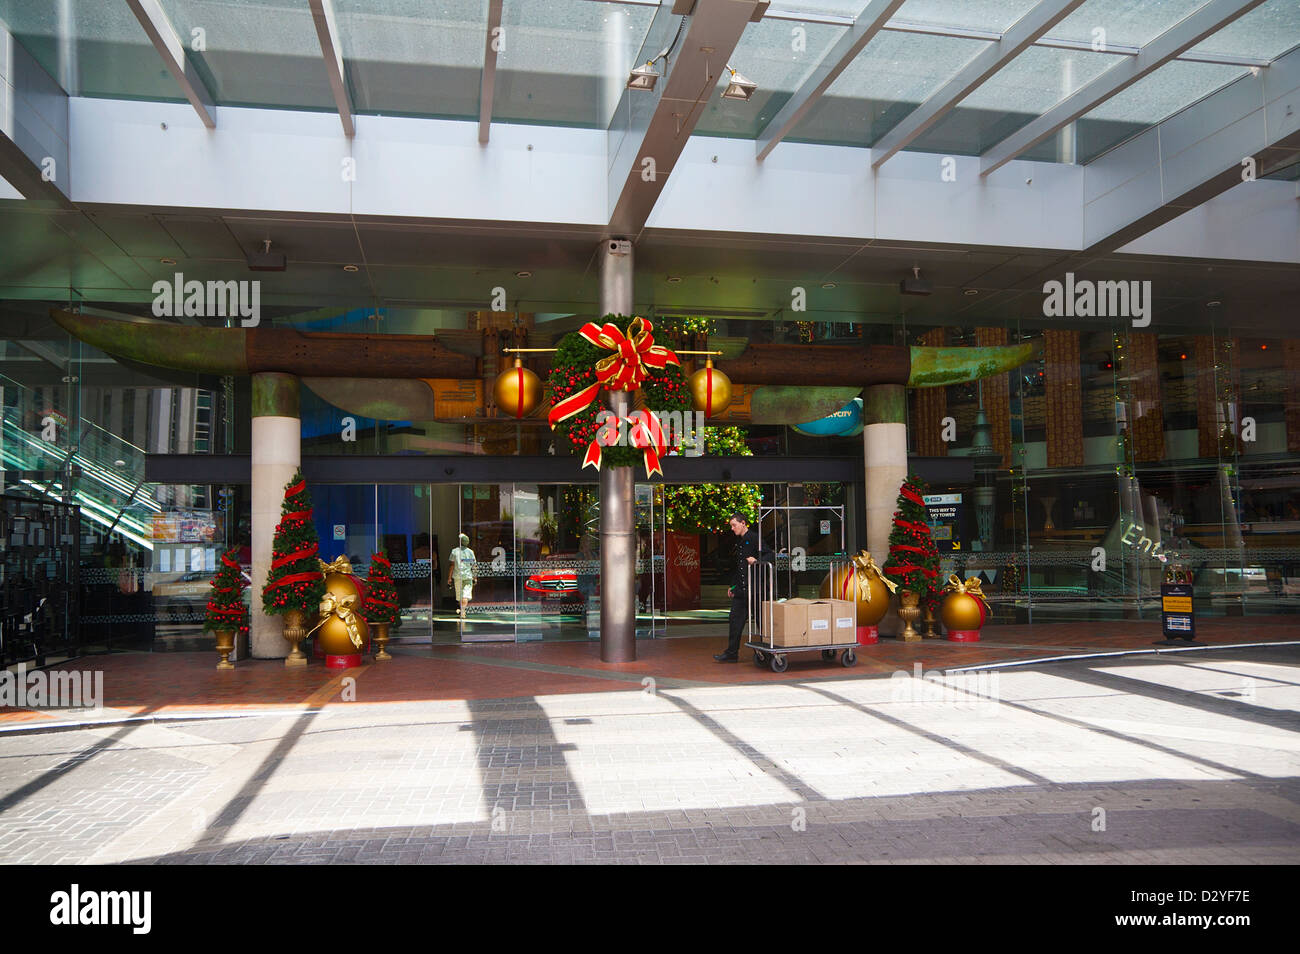 Entrance to the Sky City hotel and entertainment complex in Auckland City, North Island, New Zealand, decorated for Christmas. Stock Photo